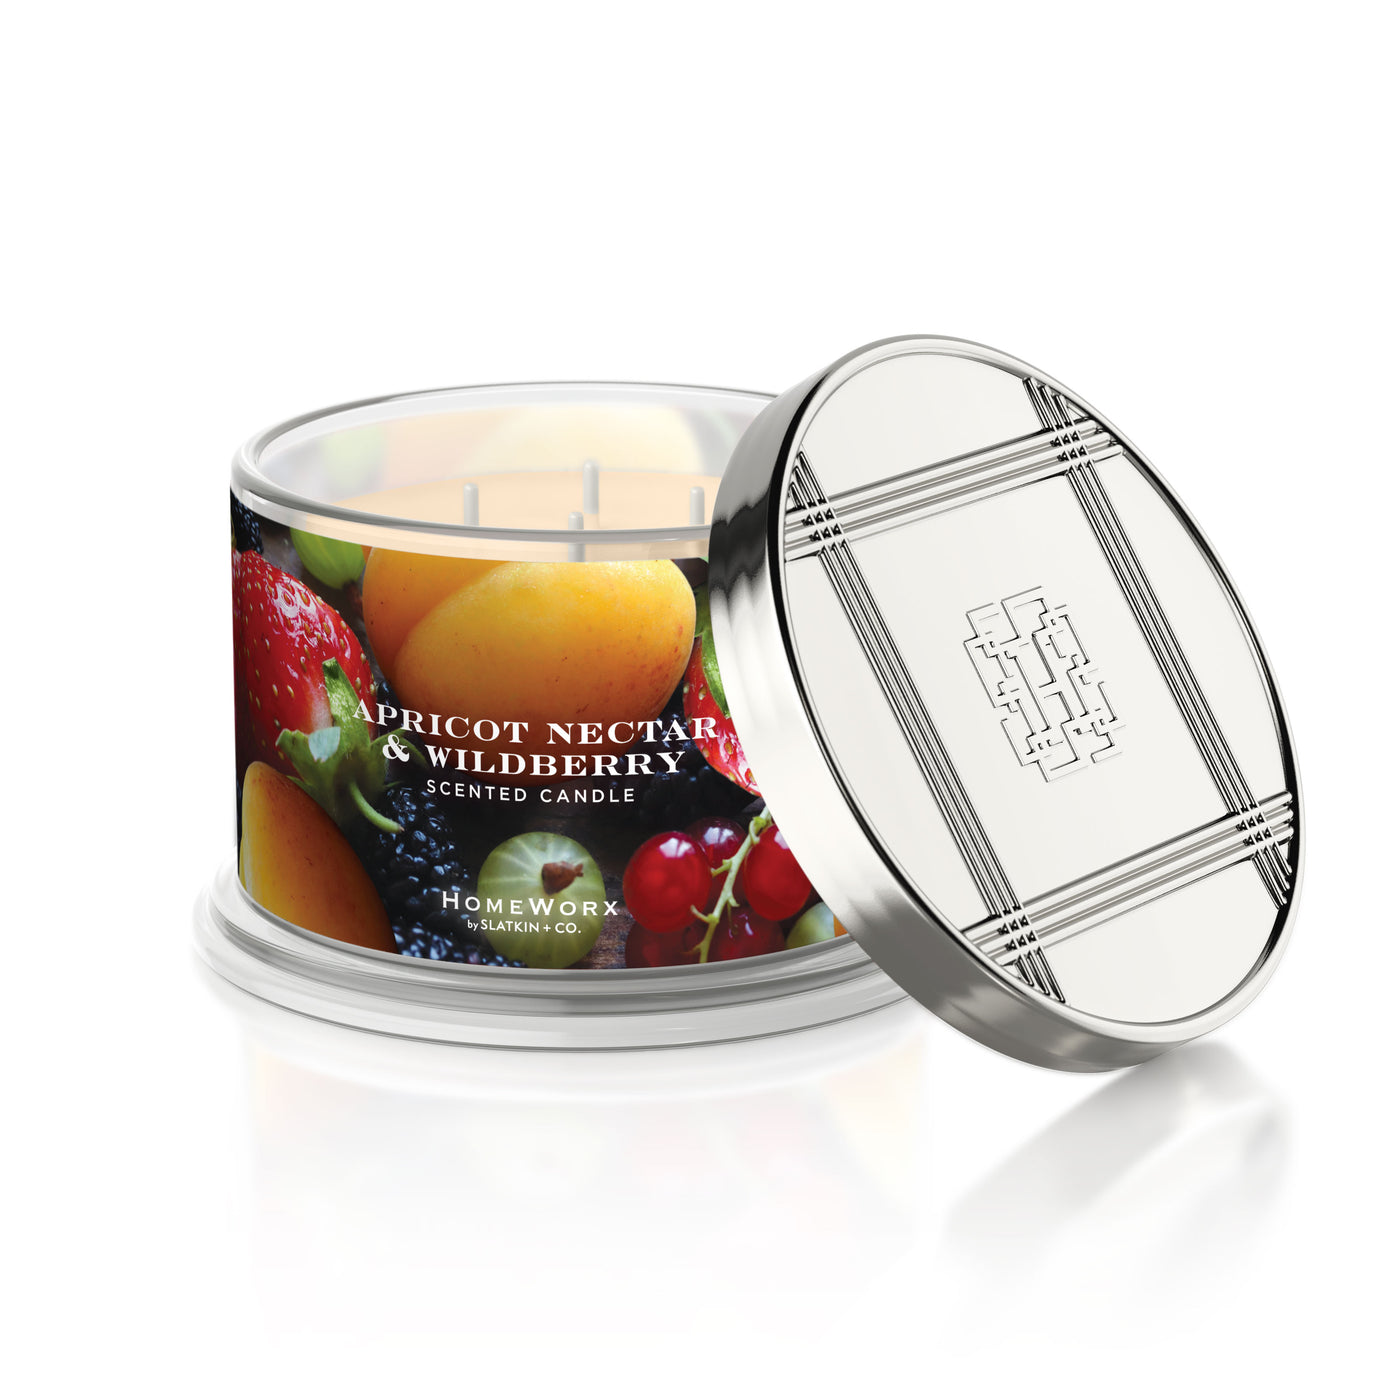 Apricot Nectar & Wildberry Candle